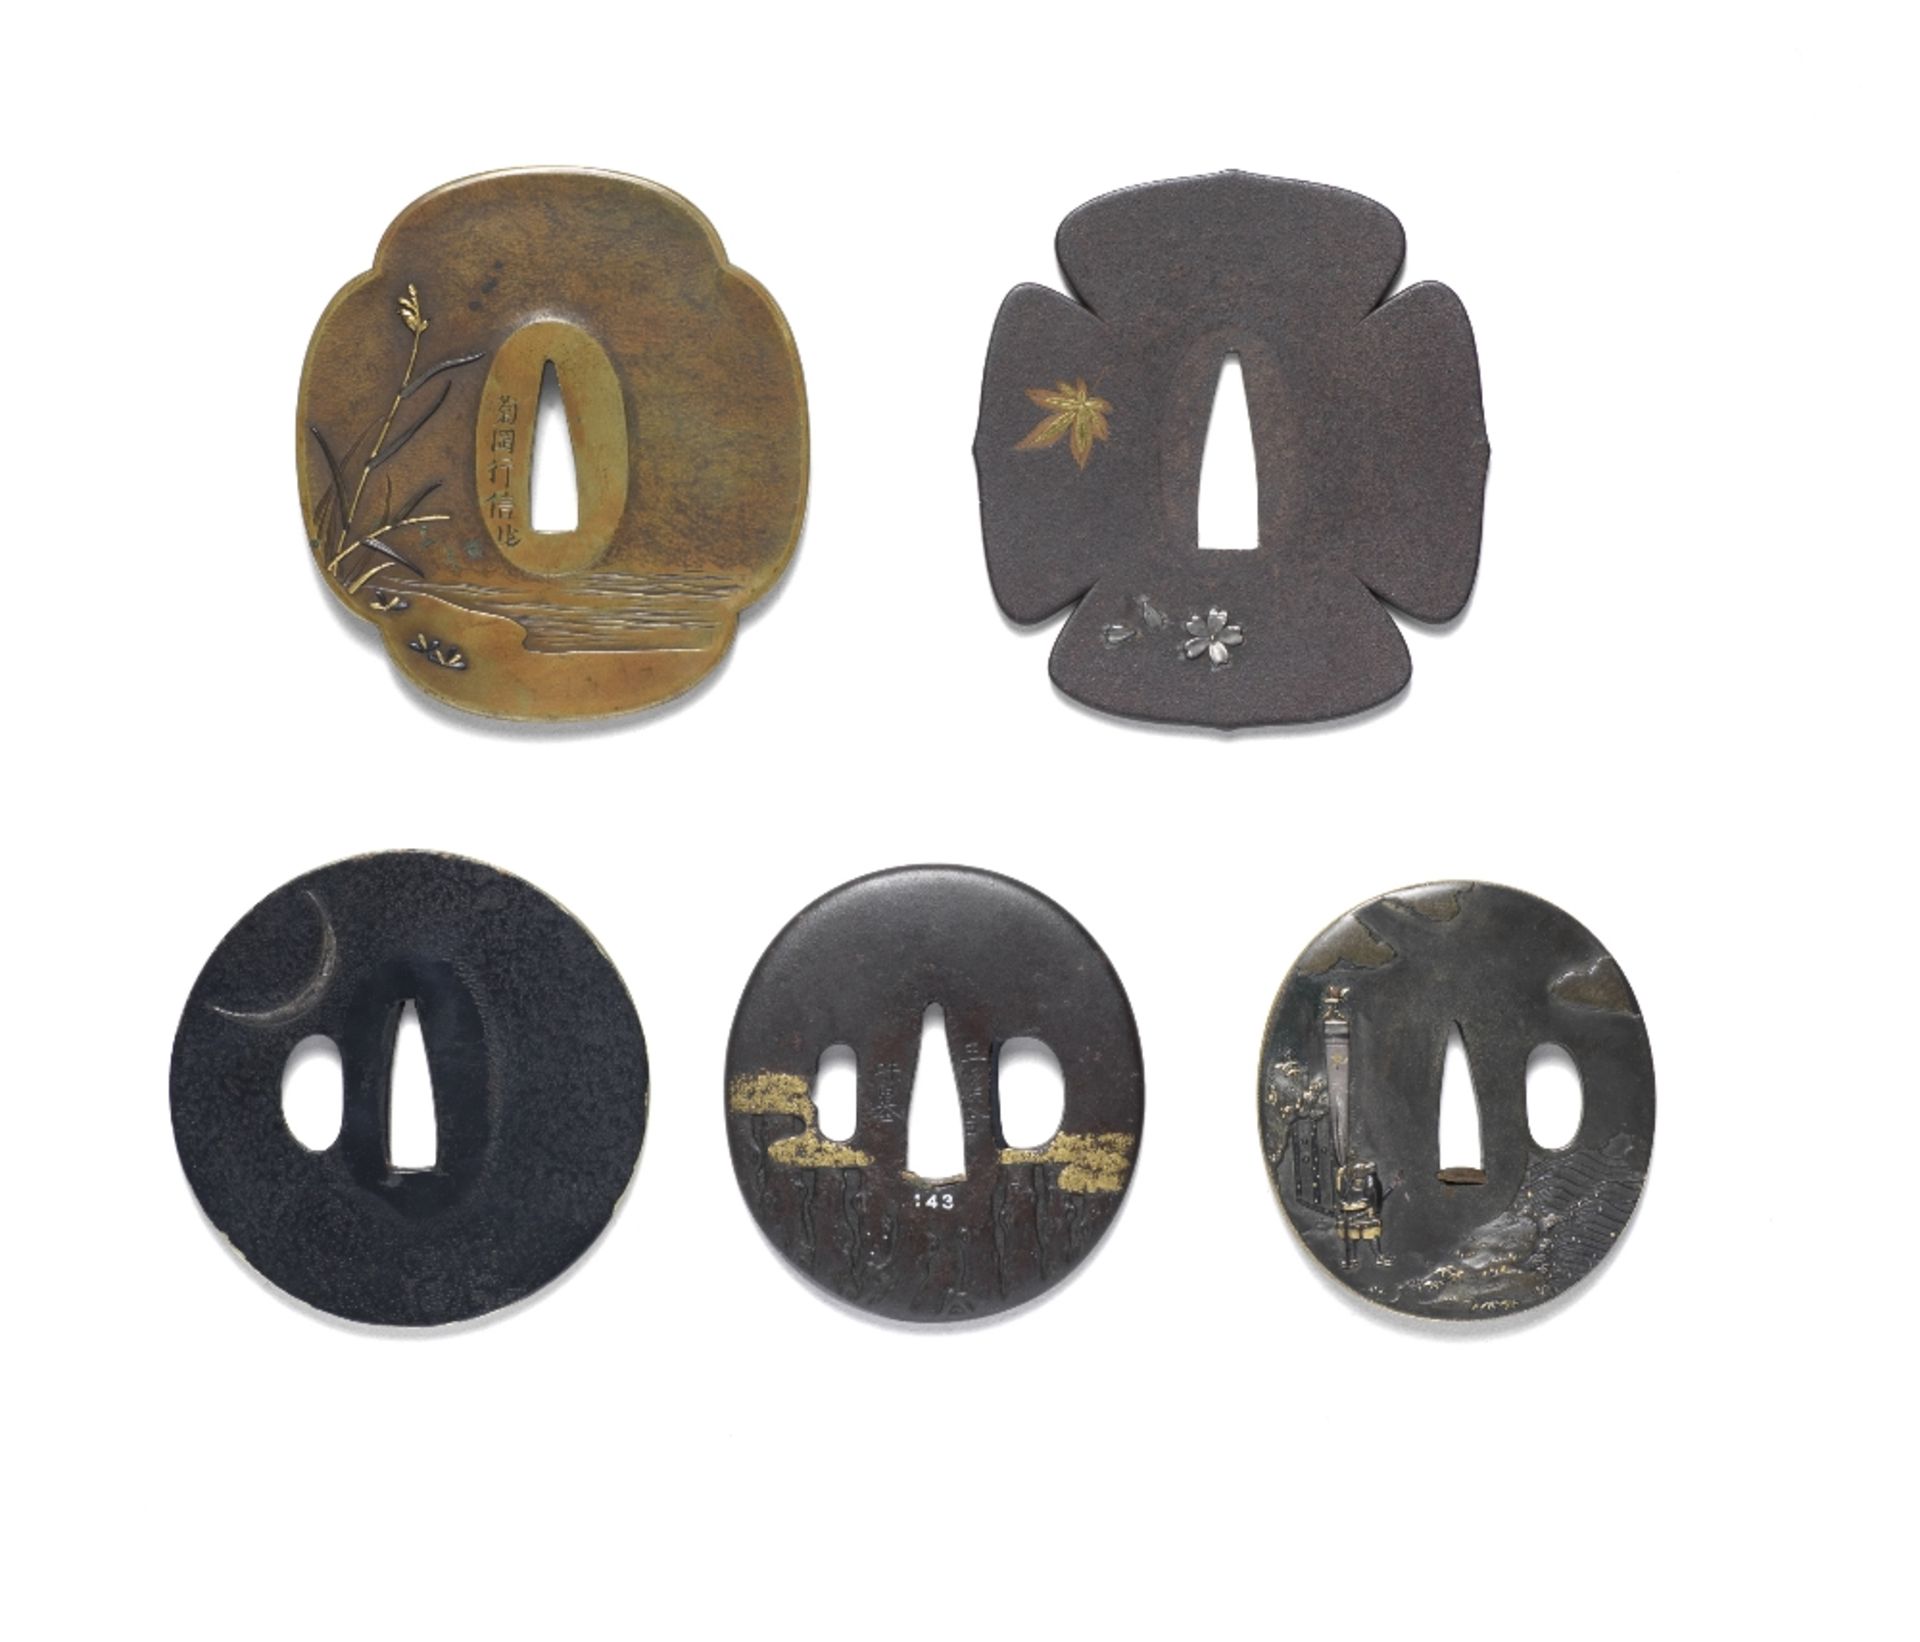 FIVE TSUBA (HAND GUARDS) Edo period (1615-1868), late 18th to mid-19th century (5) - Image 2 of 2